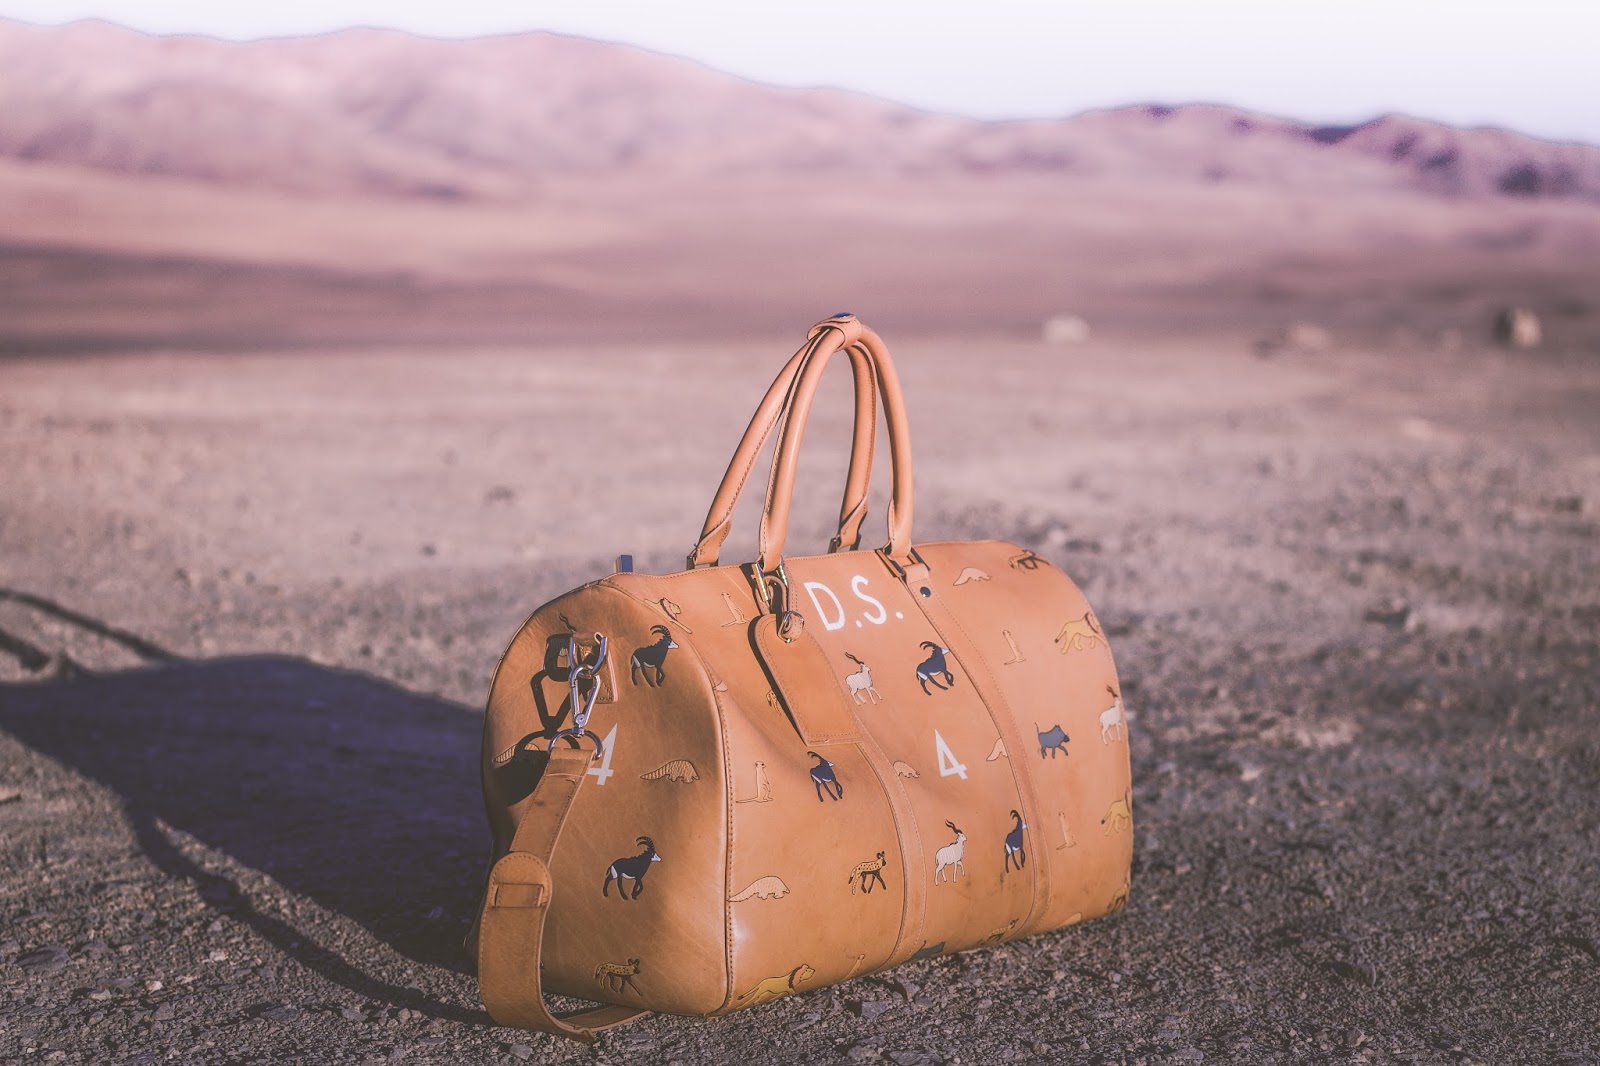 Wes Anderson-Inspired Luggage